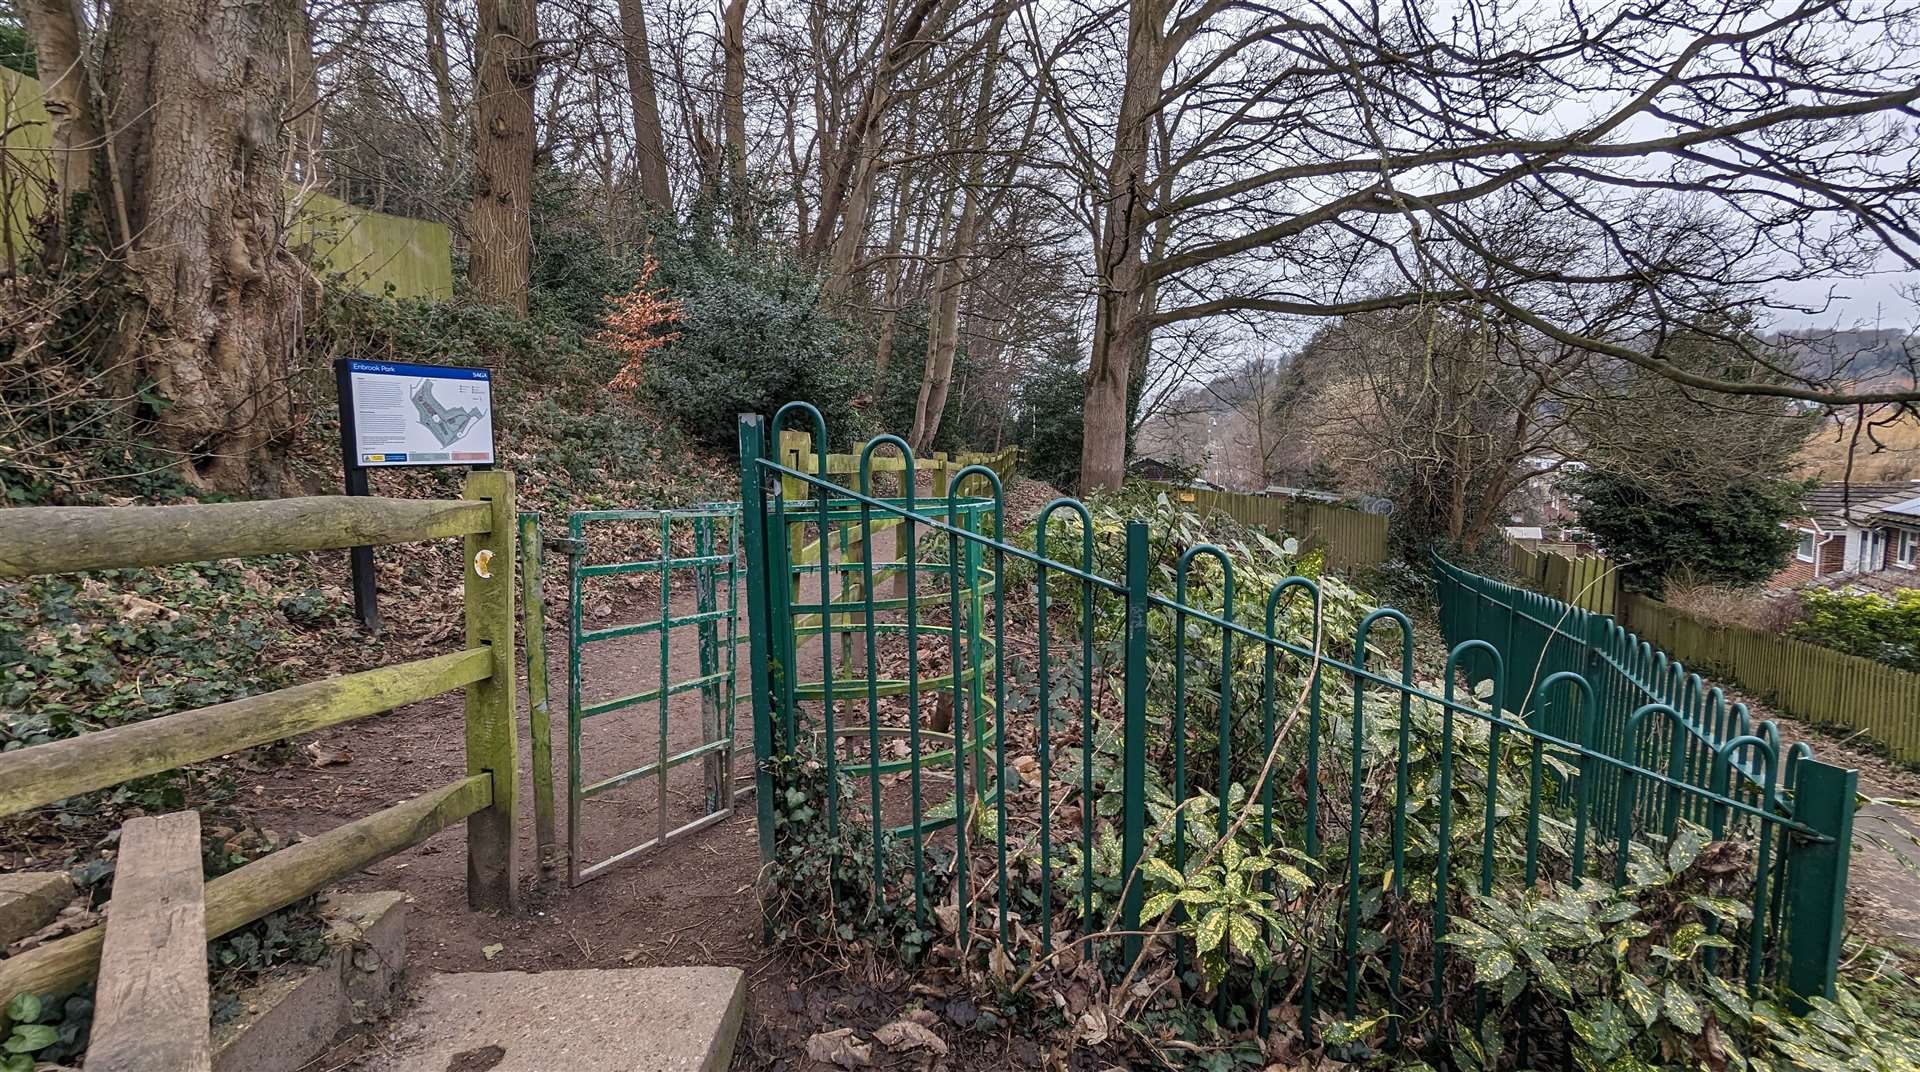 The northern entrance to Enbrook Park